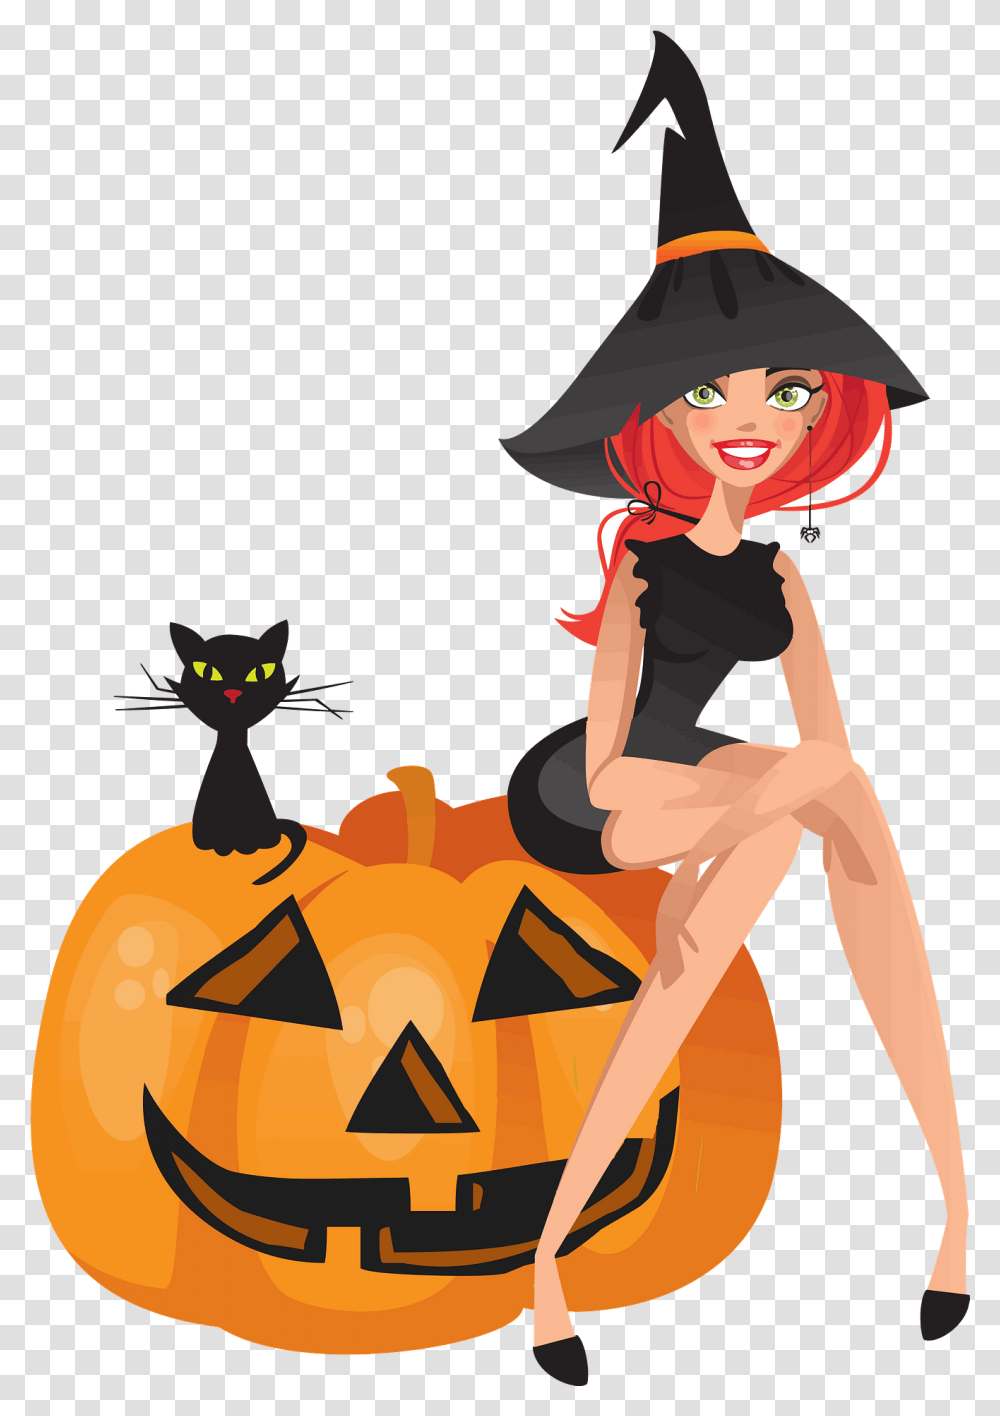 Cute Witch Sitting Hexe Mit Halloween Krbis, Hat, Clothing, Apparel, Poster Transparent Png